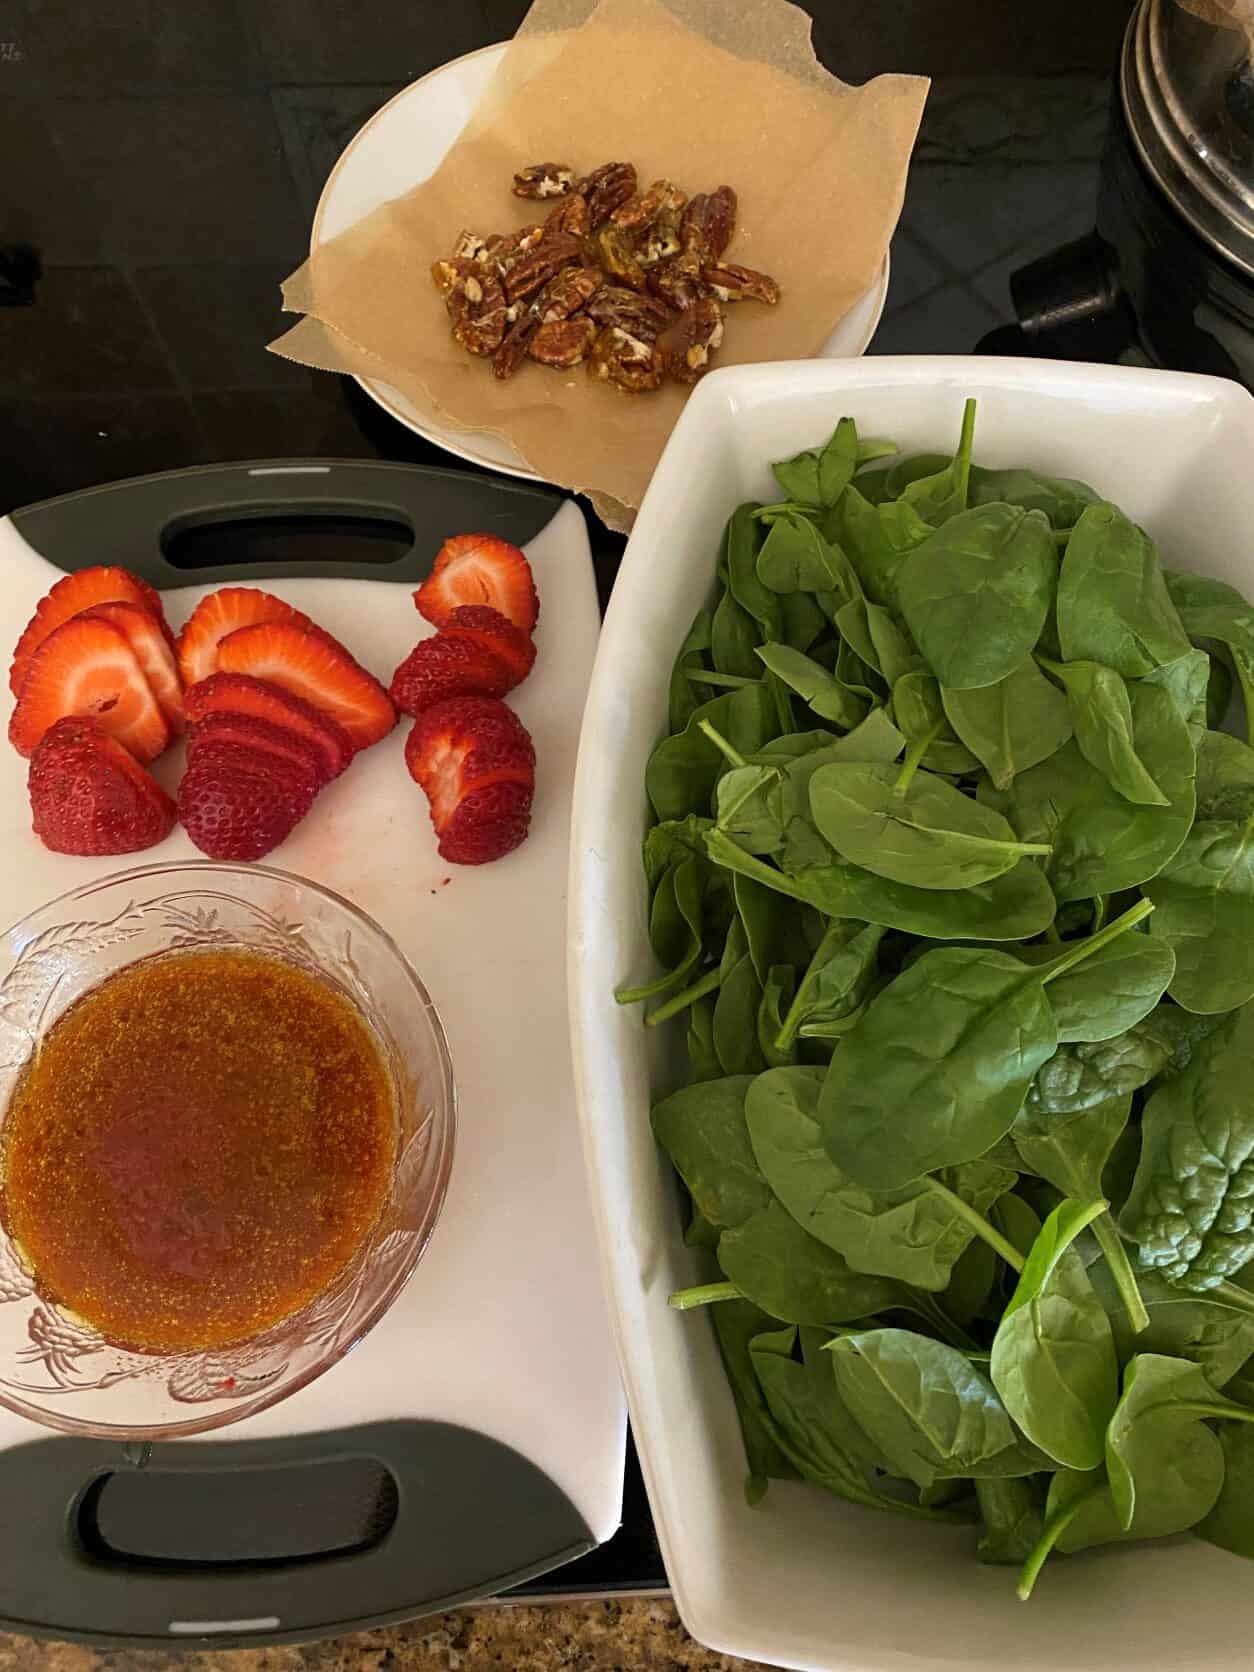 Ingredients to make Spinach Strawberry Salad